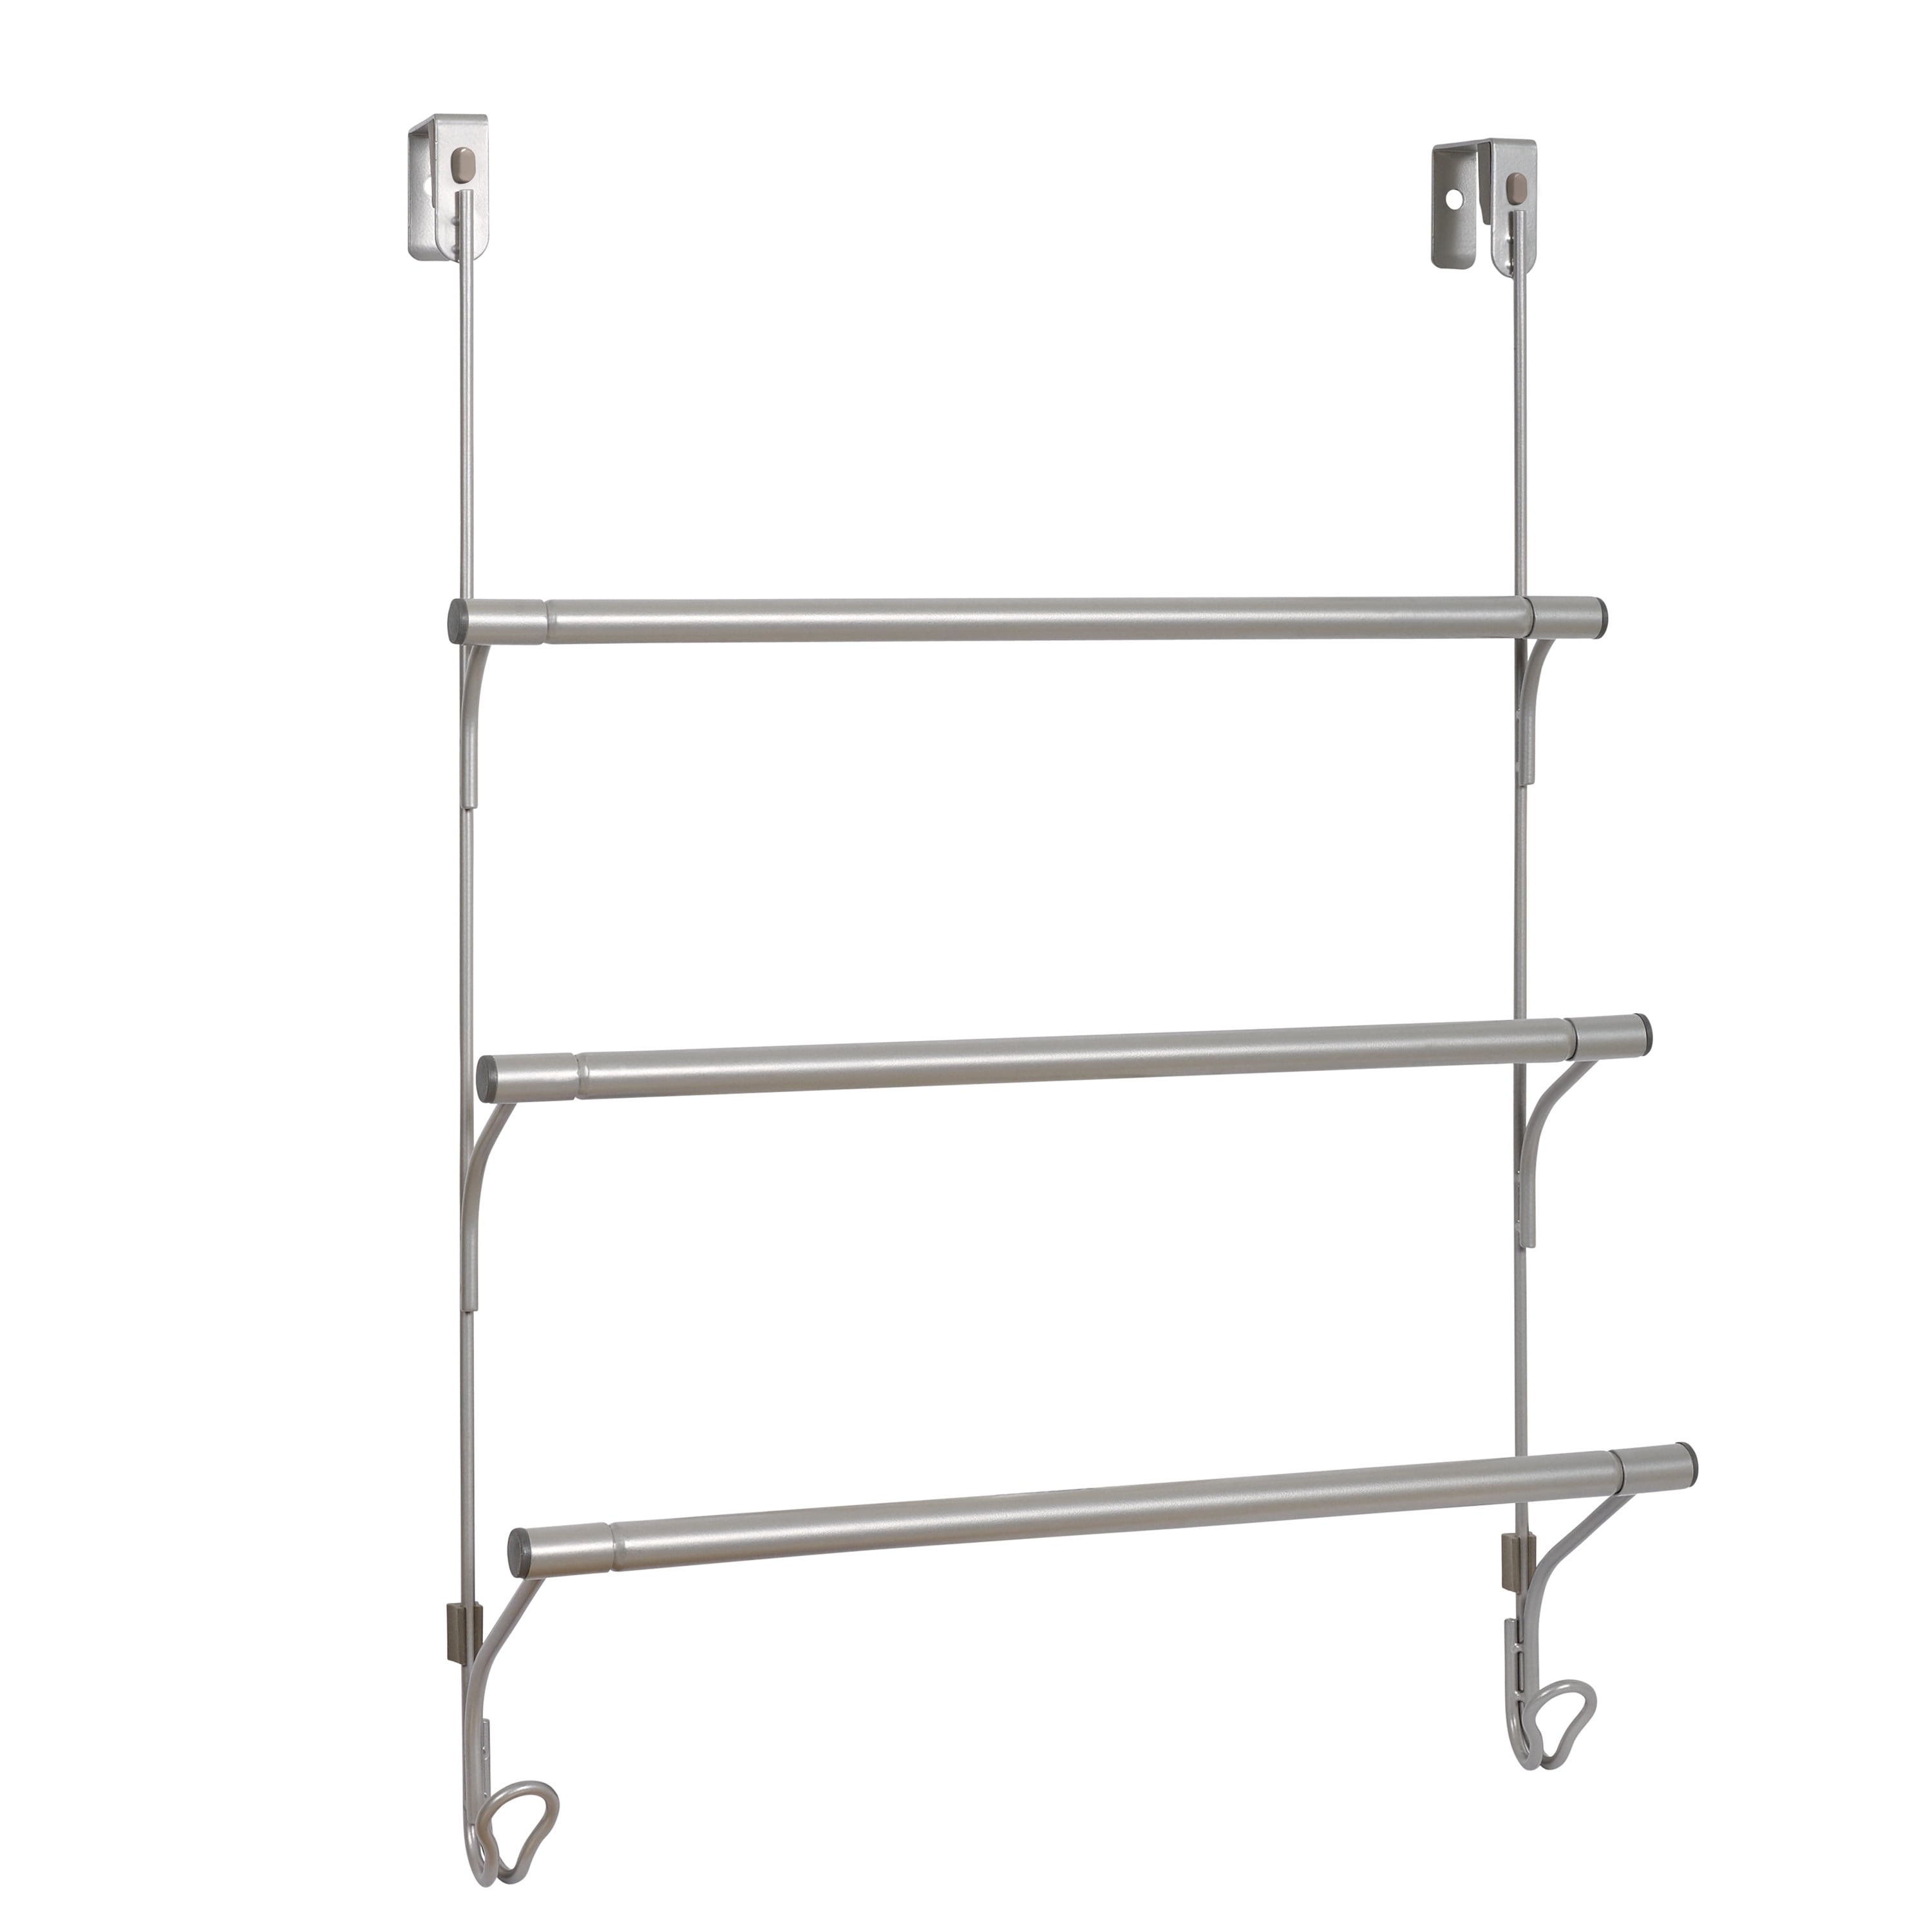 Details about   18" Brushed Nickel 2 Towel Bar Glass Shelf Combo Bathroom Wall Hanging Storage 